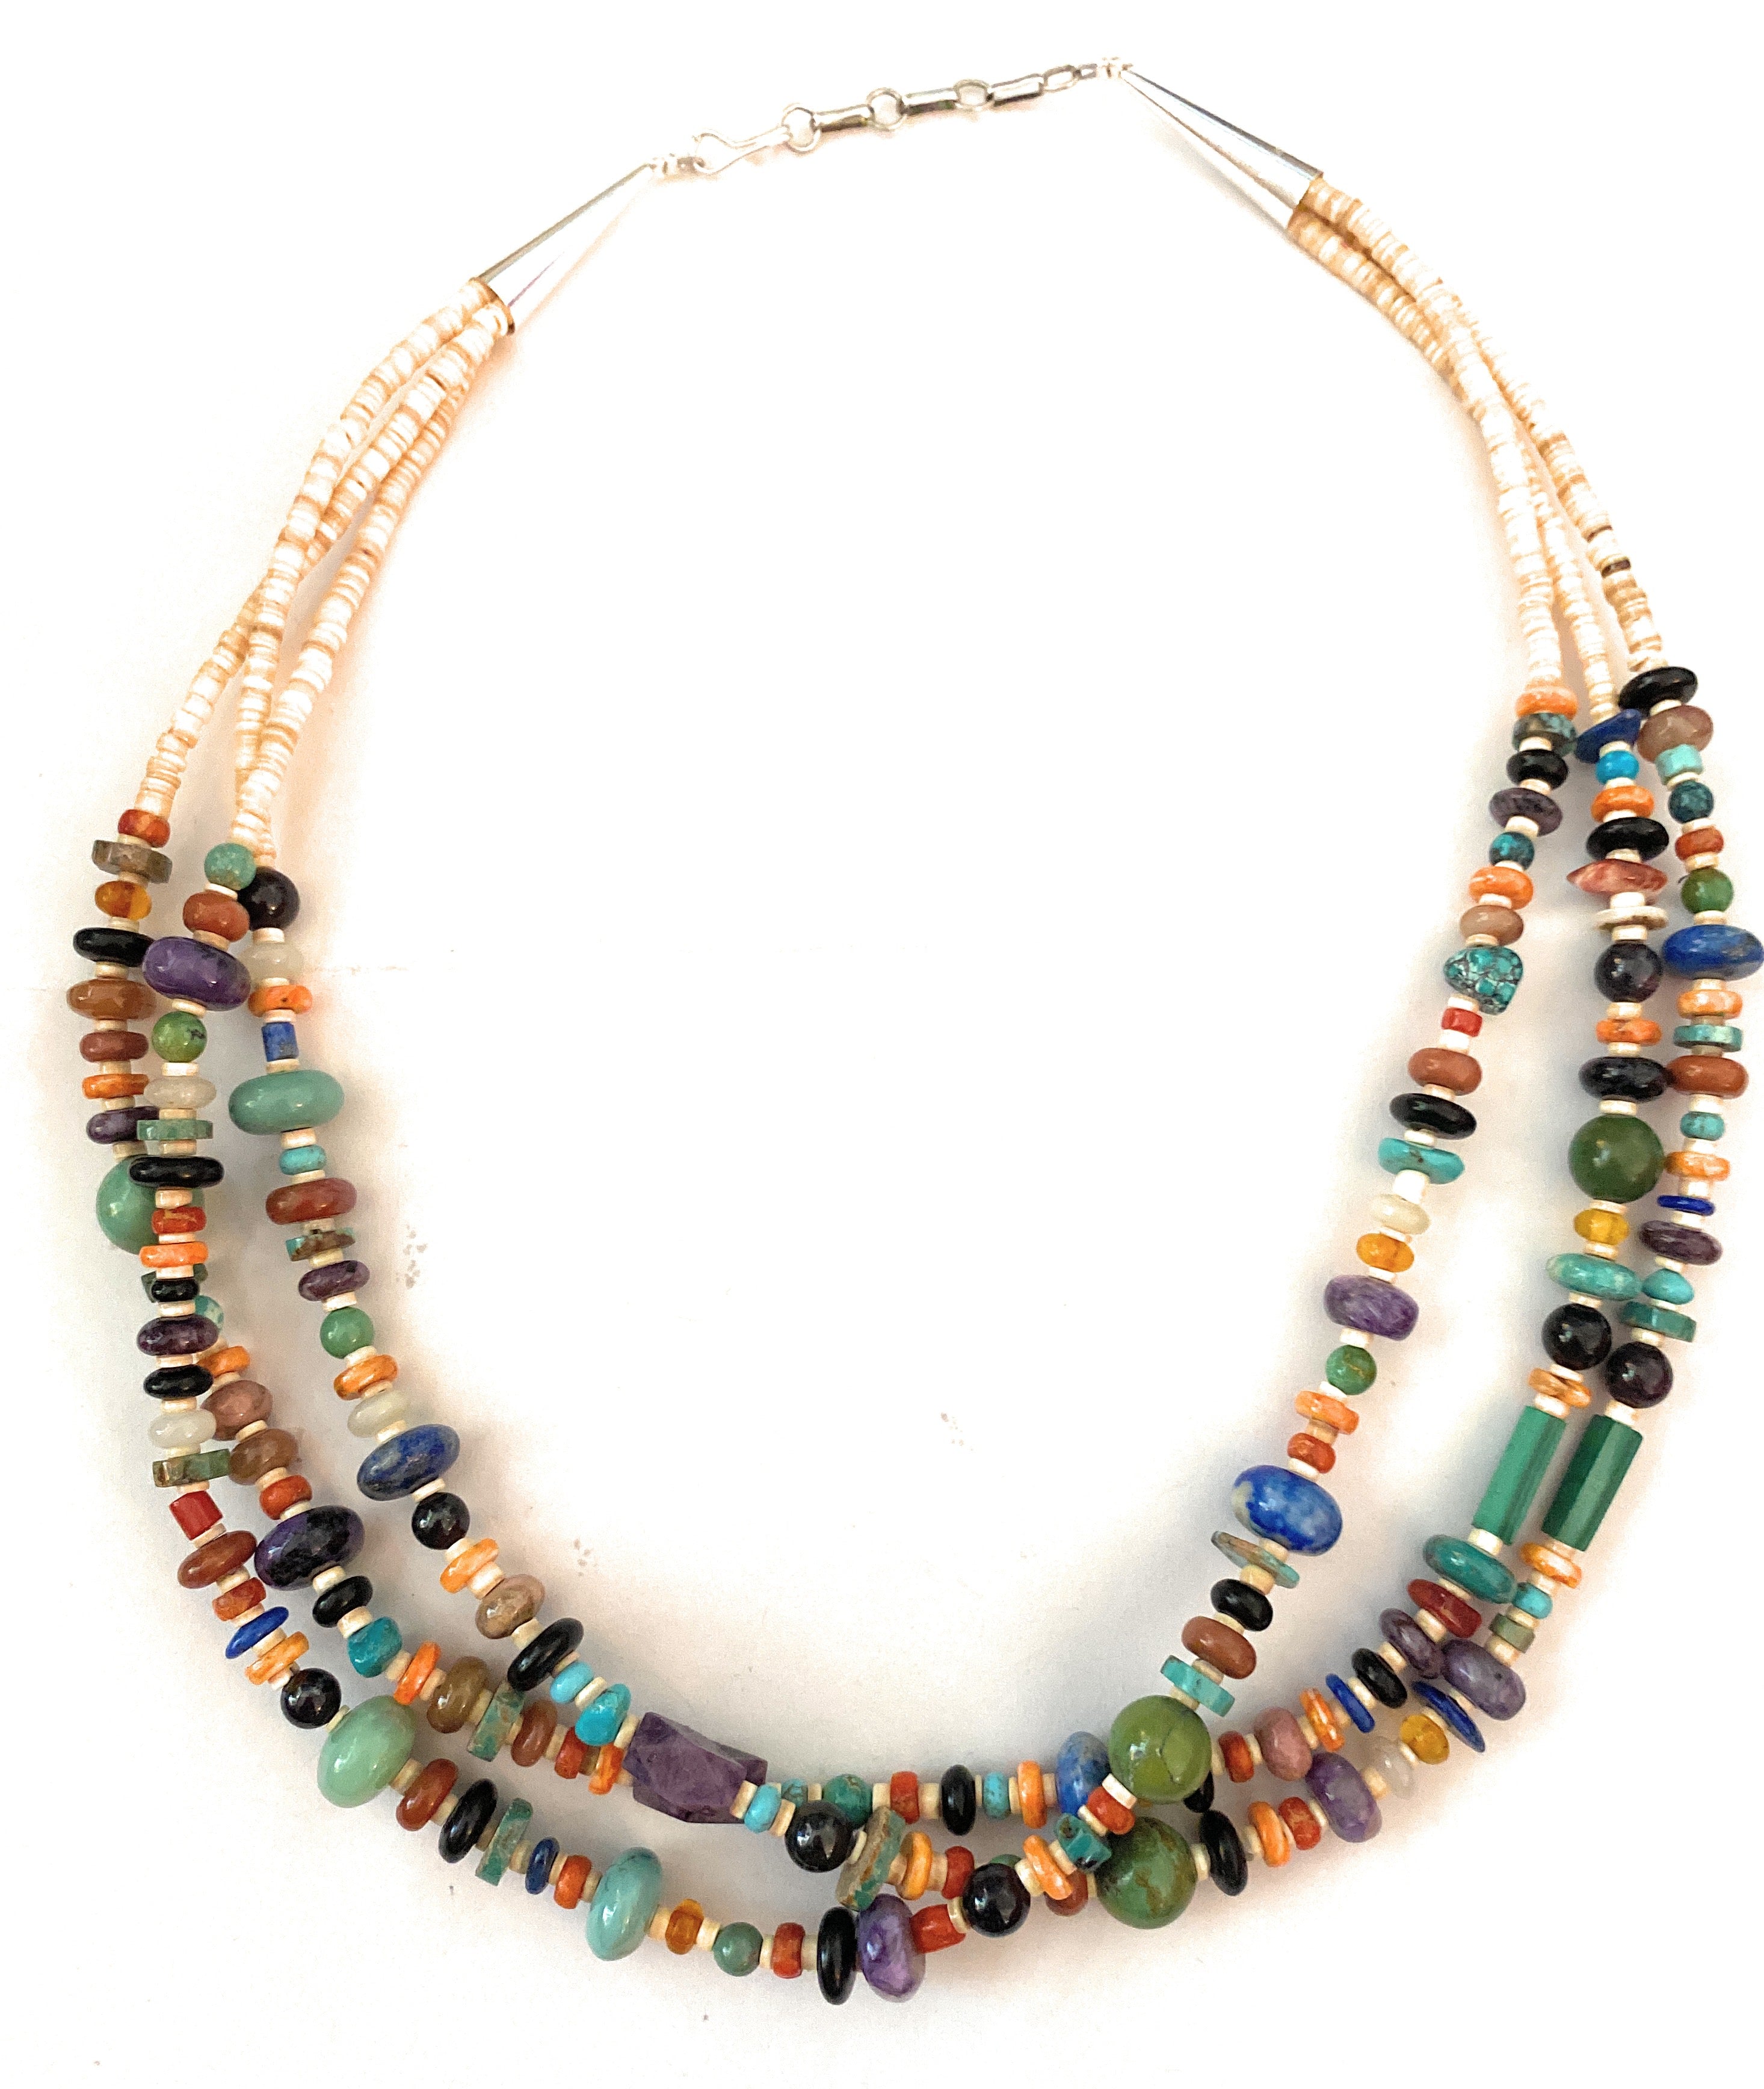 Triple beaded chain necklace – Lively Jewelry Co.